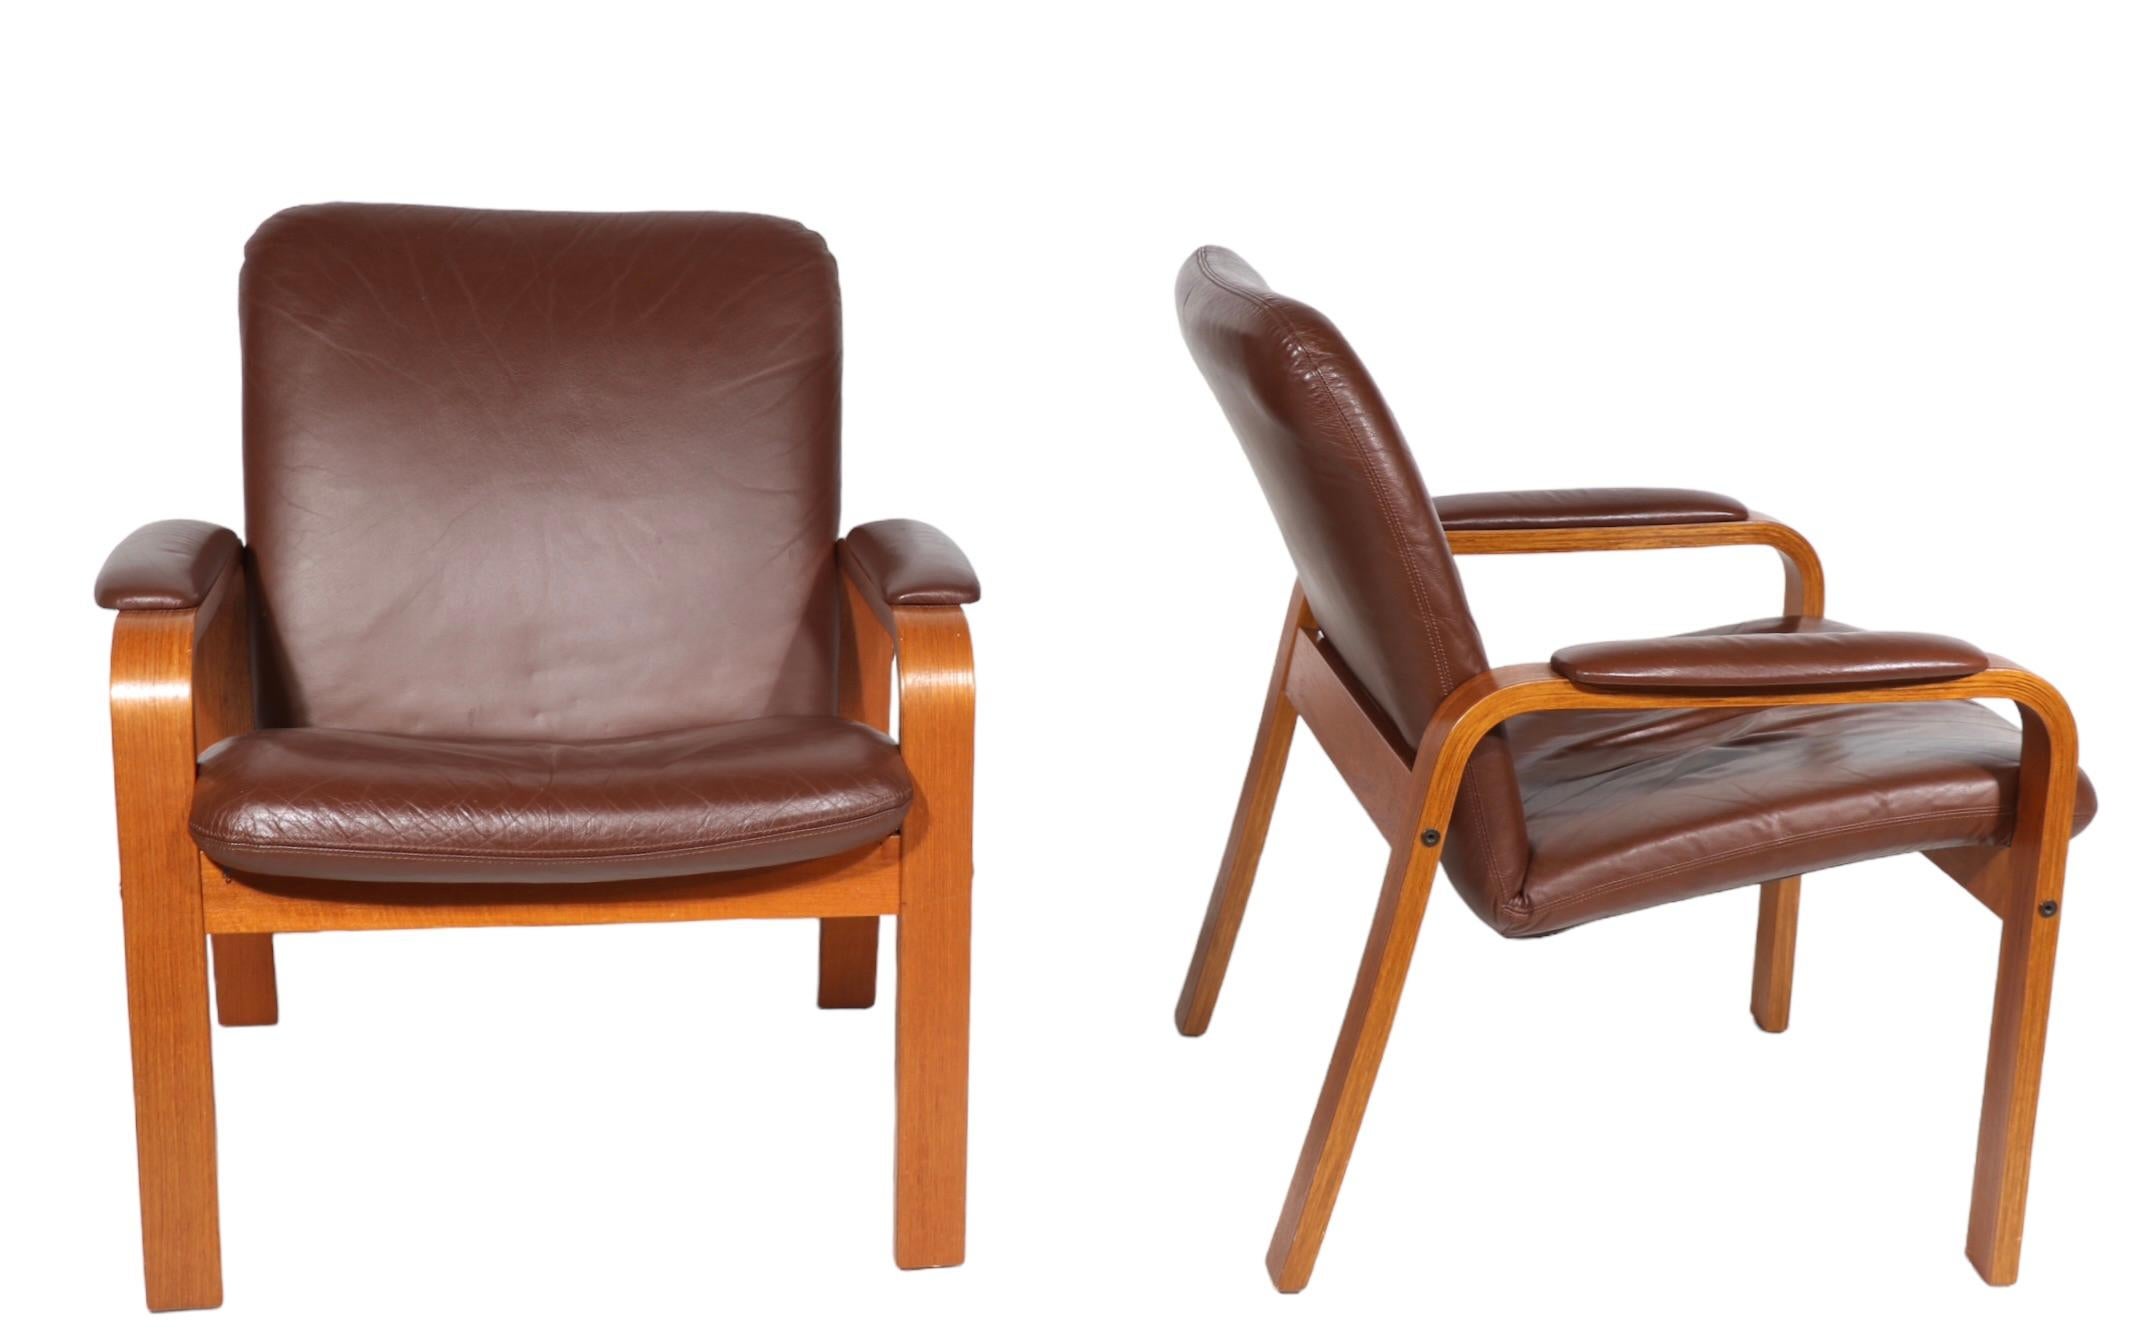 Pr. Scandinavian Mid Century Modern Lounge Arm Chairs Made in Norway by Ekorness For Sale 7